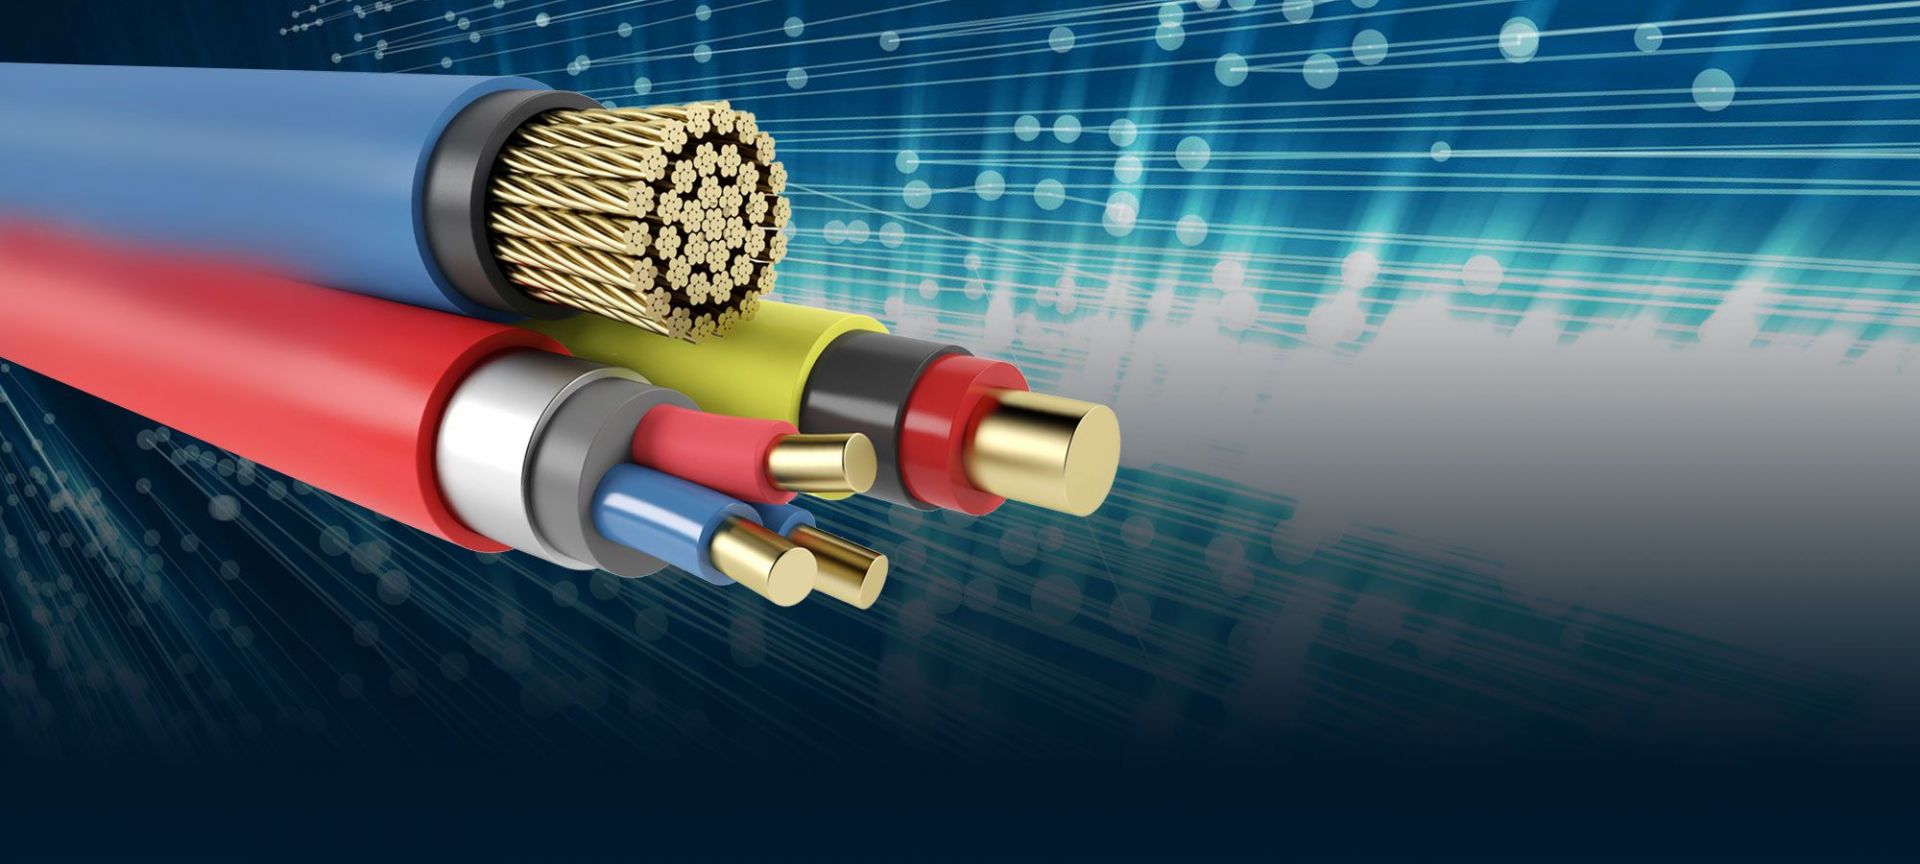 TOTAL SOLUTION PROVIDER WITH WIRE, CABLE AND ASSEMBLY